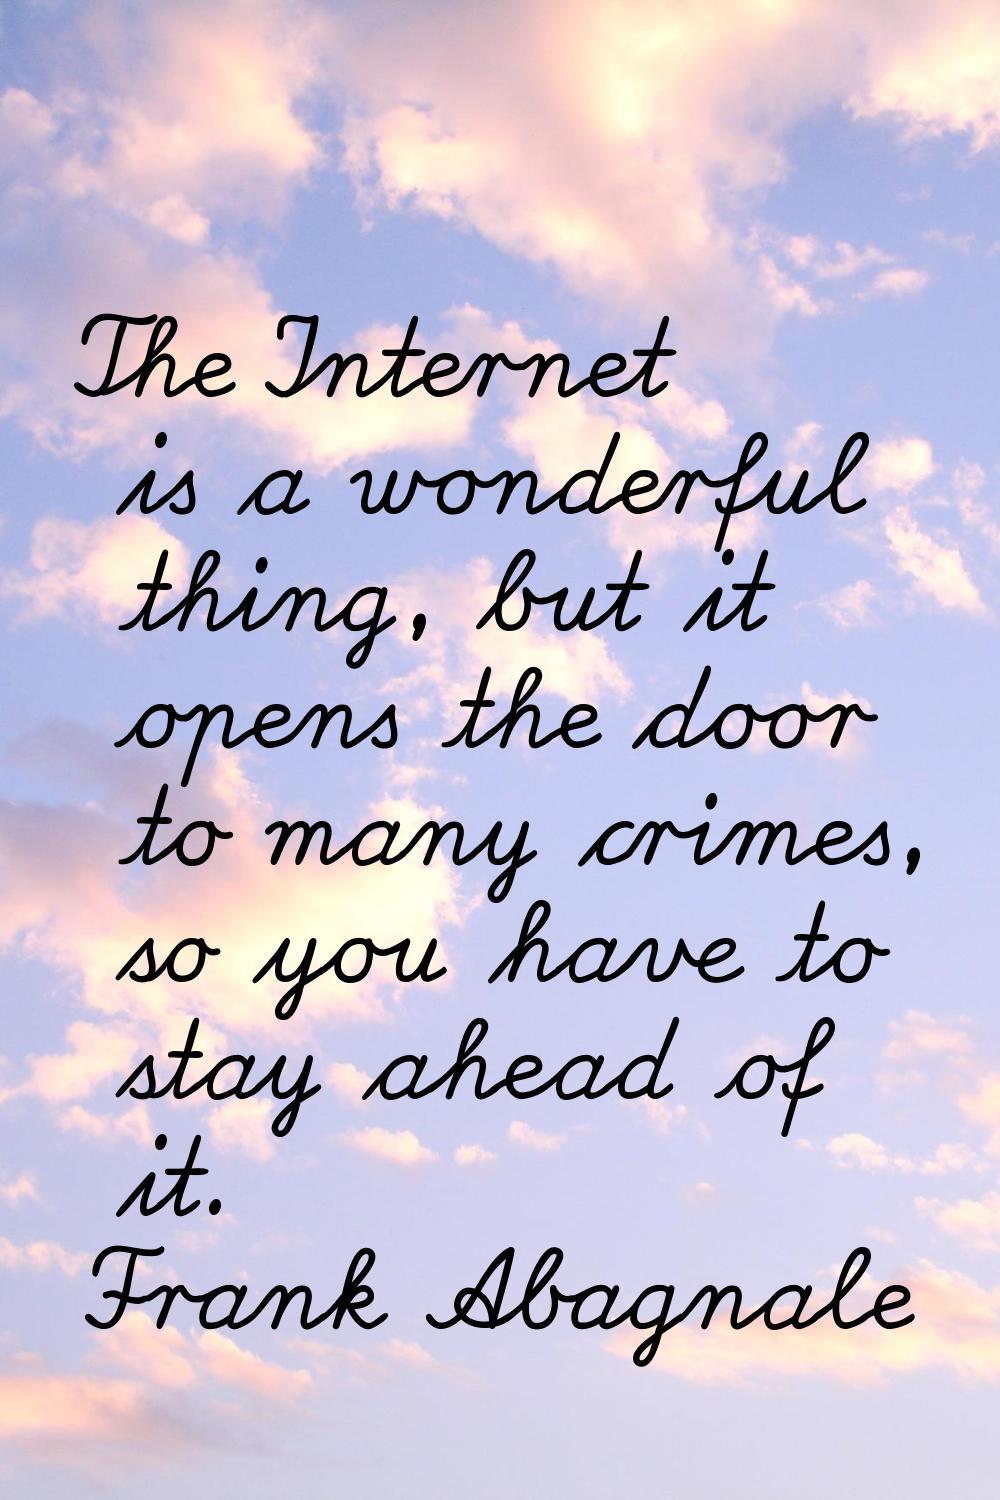 The Internet is a wonderful thing, but it opens the door to many crimes, so you have to stay ahead 